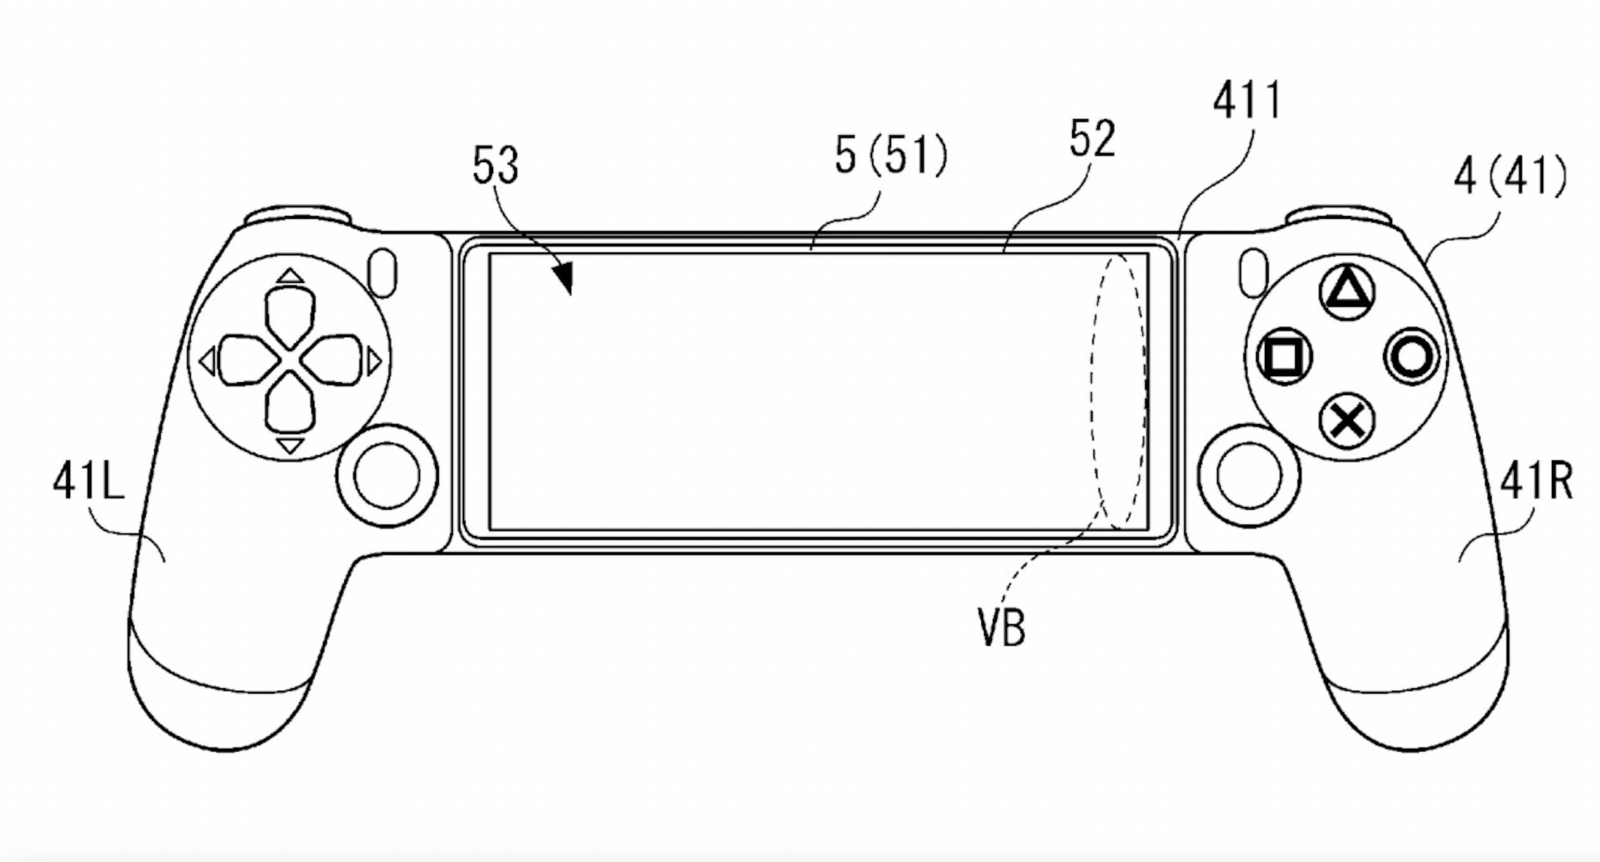 Brevetto Sony Files per controller PlayStation Mobile